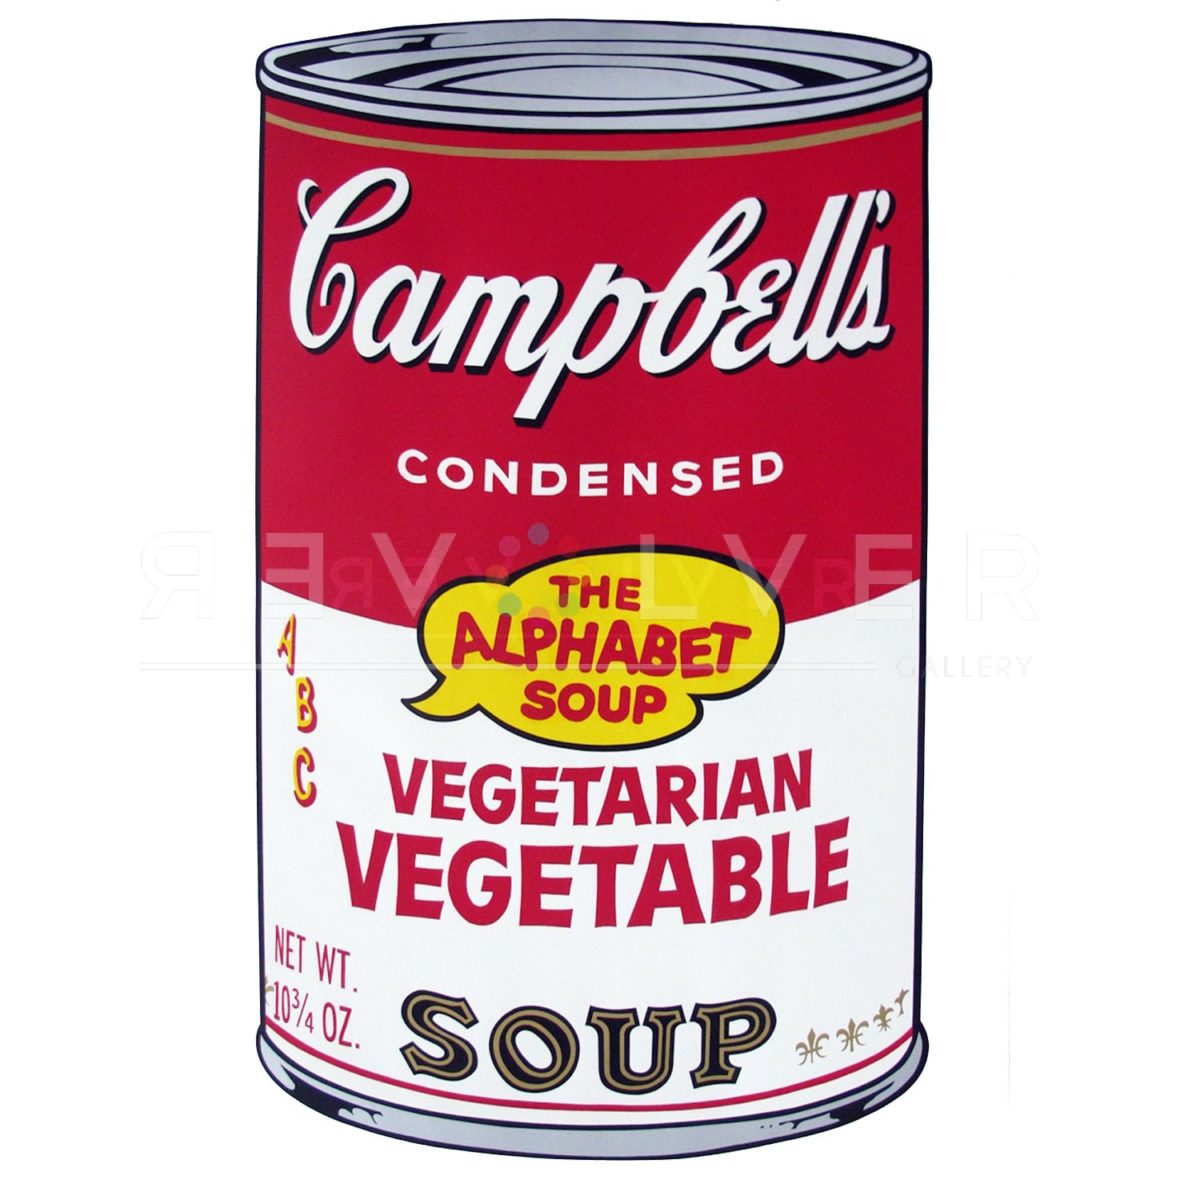 One of Ten Campbell's Soup Cans by Andy Warhol from 1969. Red and white can labeled Vegetarian Vegetable with "the Alphabet Soup" in a though bubble ontop of the golden seal.